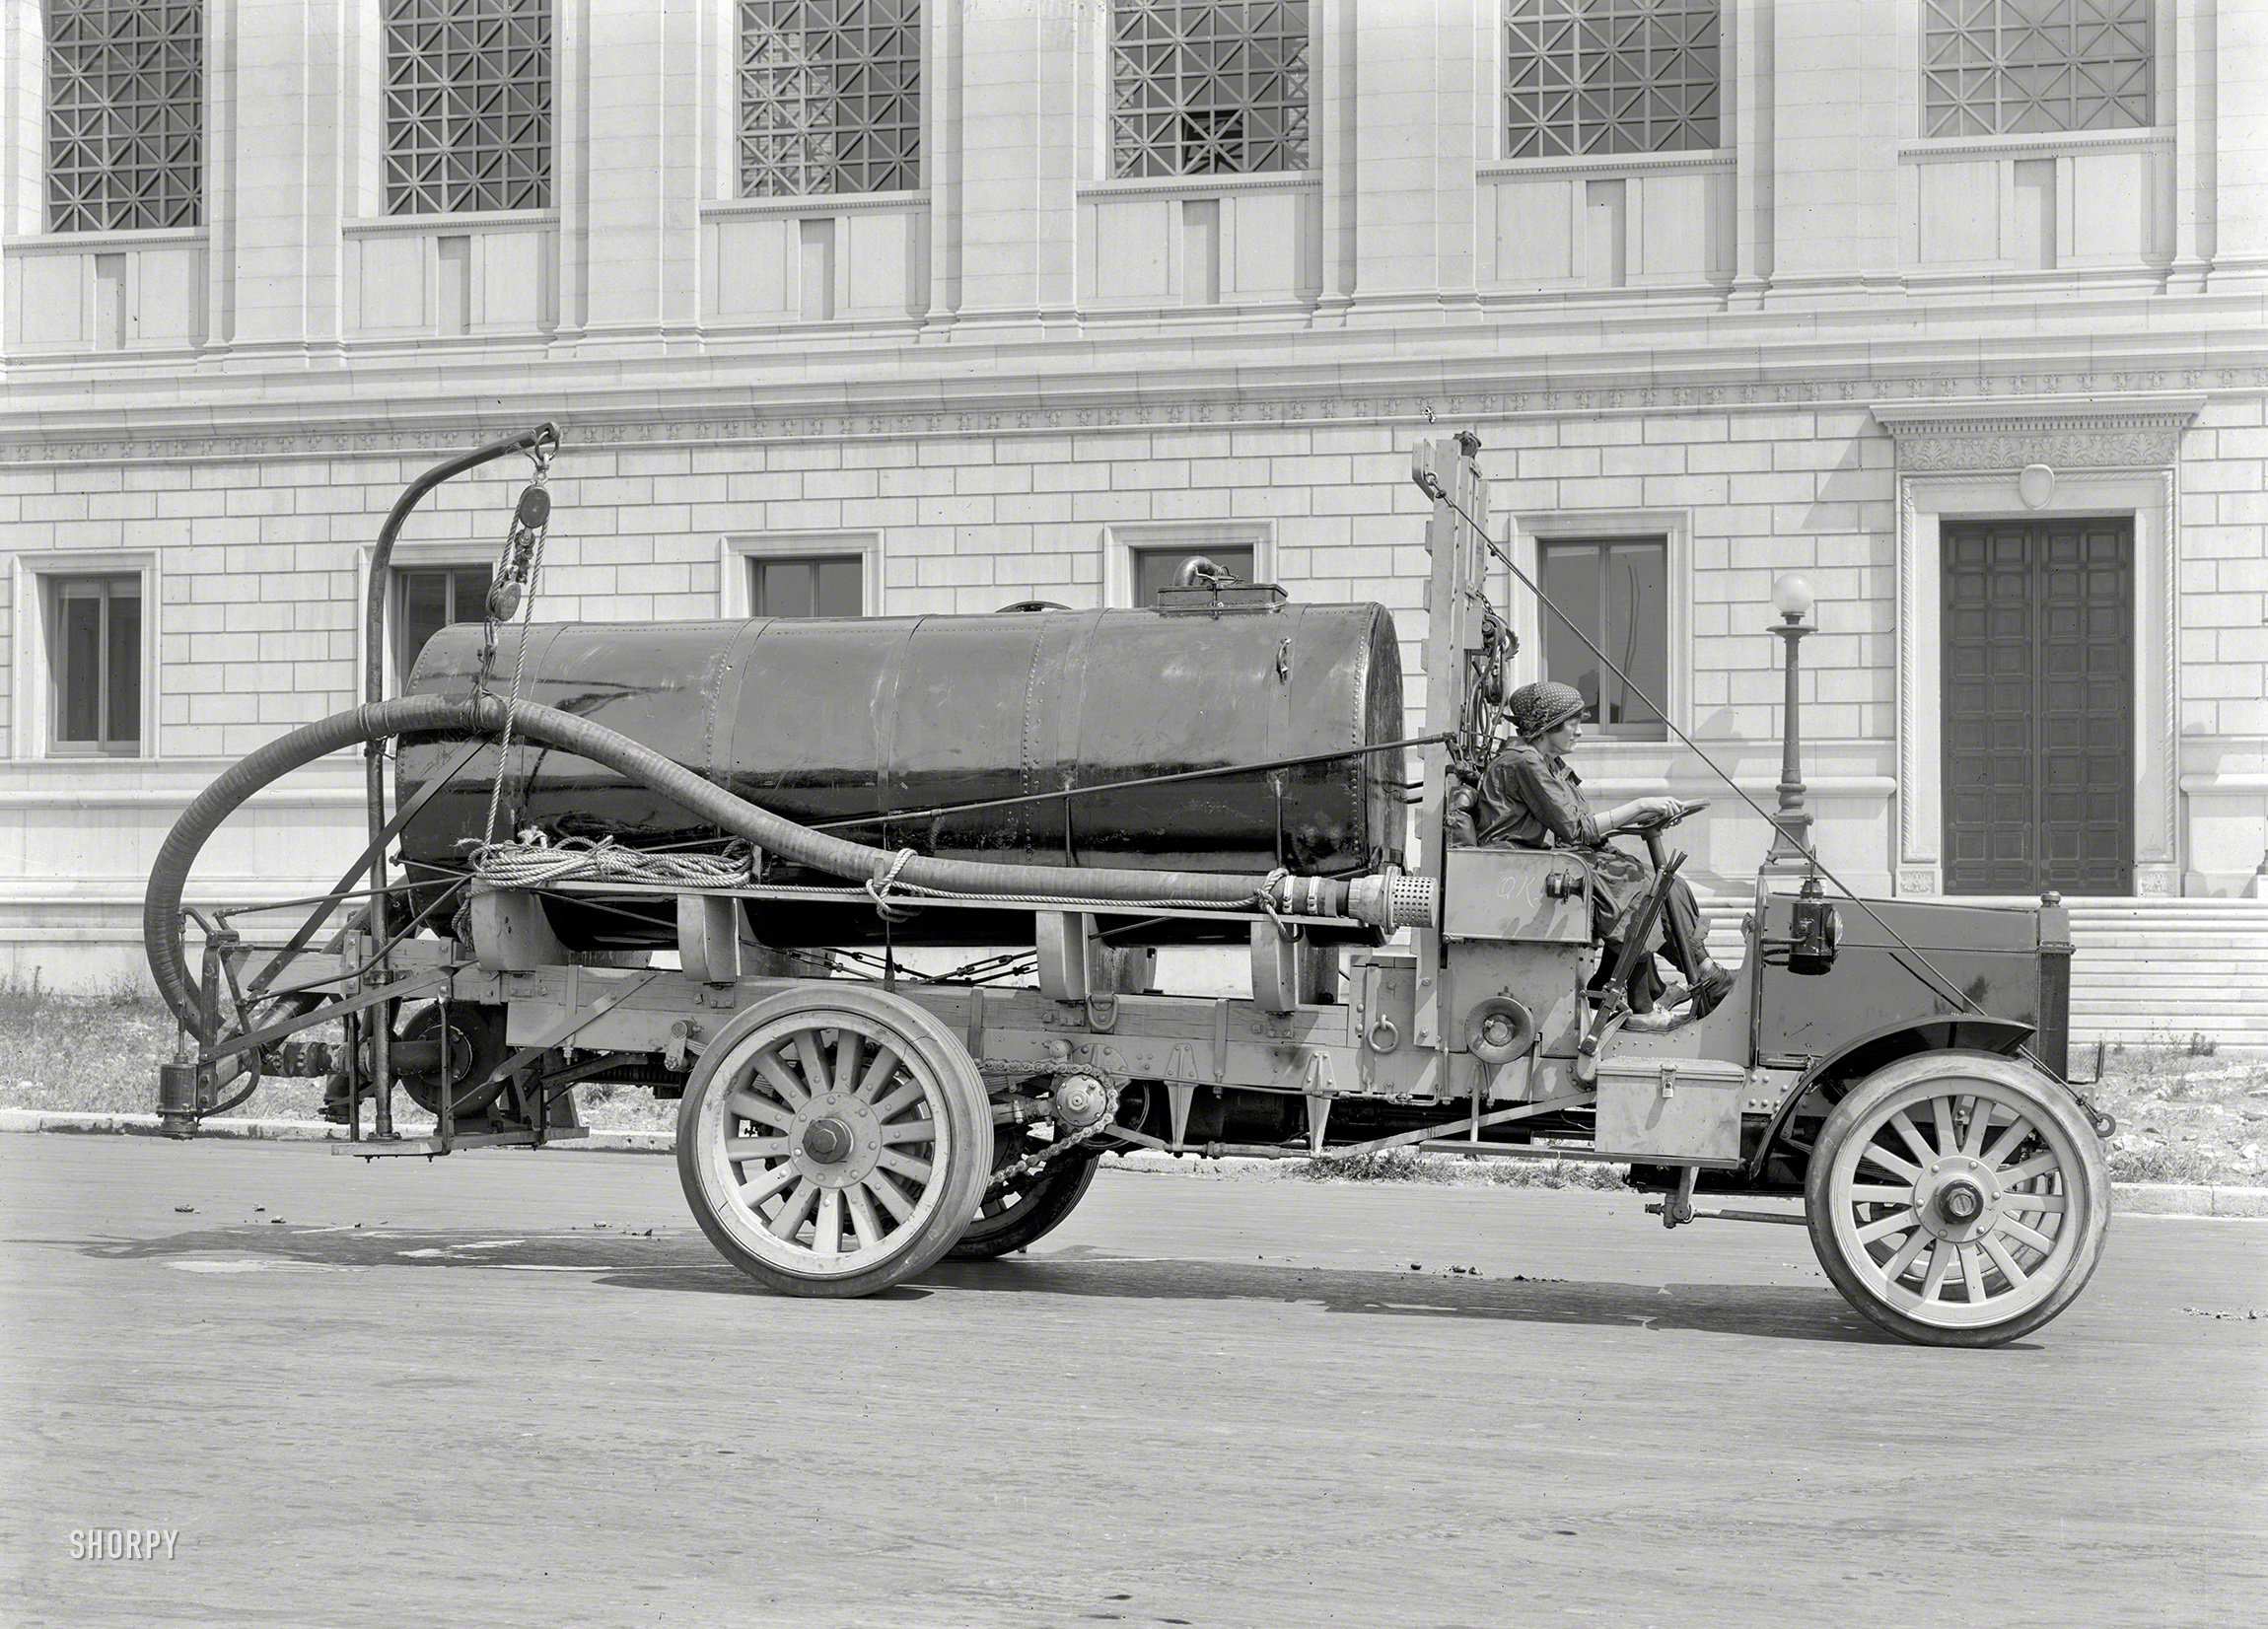 &nbsp; &nbsp; Latest entry in the Shorpy Concours of Complicated Contraptions.
San Francisco circa 1919. "Peerless tank truck." Last seen here, and a cousin to this Red Cross tanker used, to no discernible effect, to wet down streets during the influenza epidemic of the late teens. 5x7 glass negative. View full size.